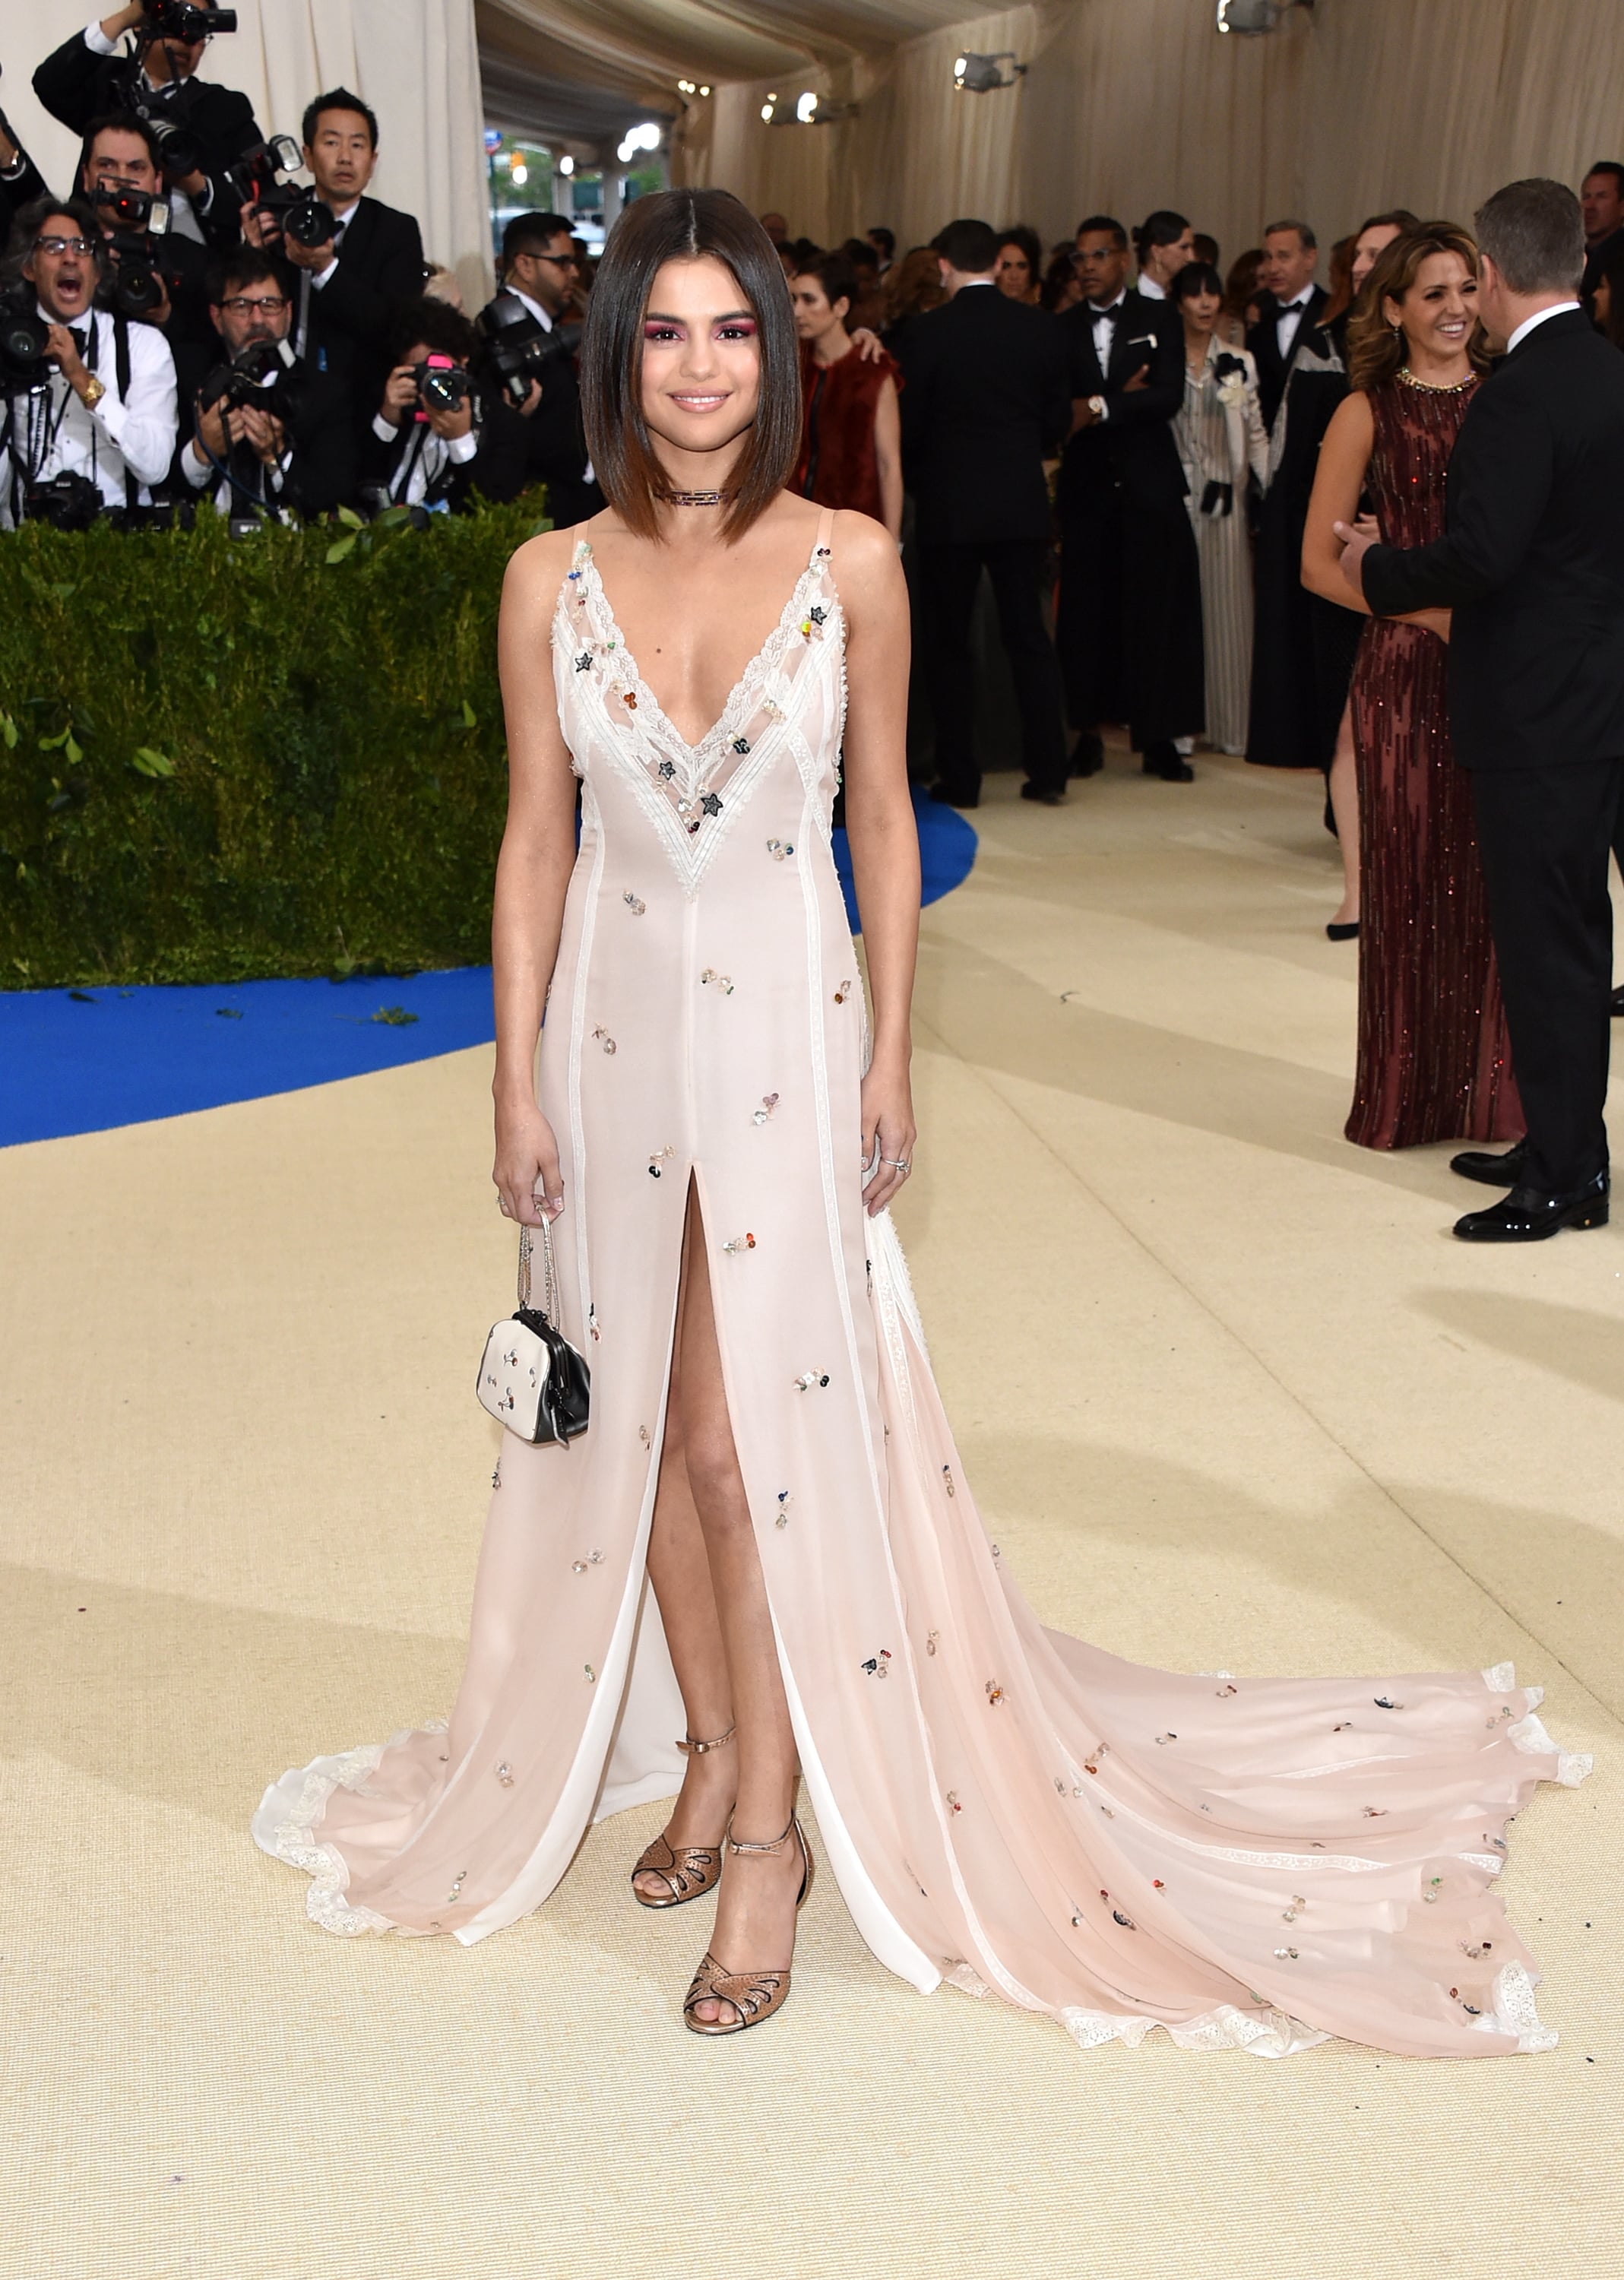 Selena Gomez Talks About Her Fame At The 2017 MET Gala